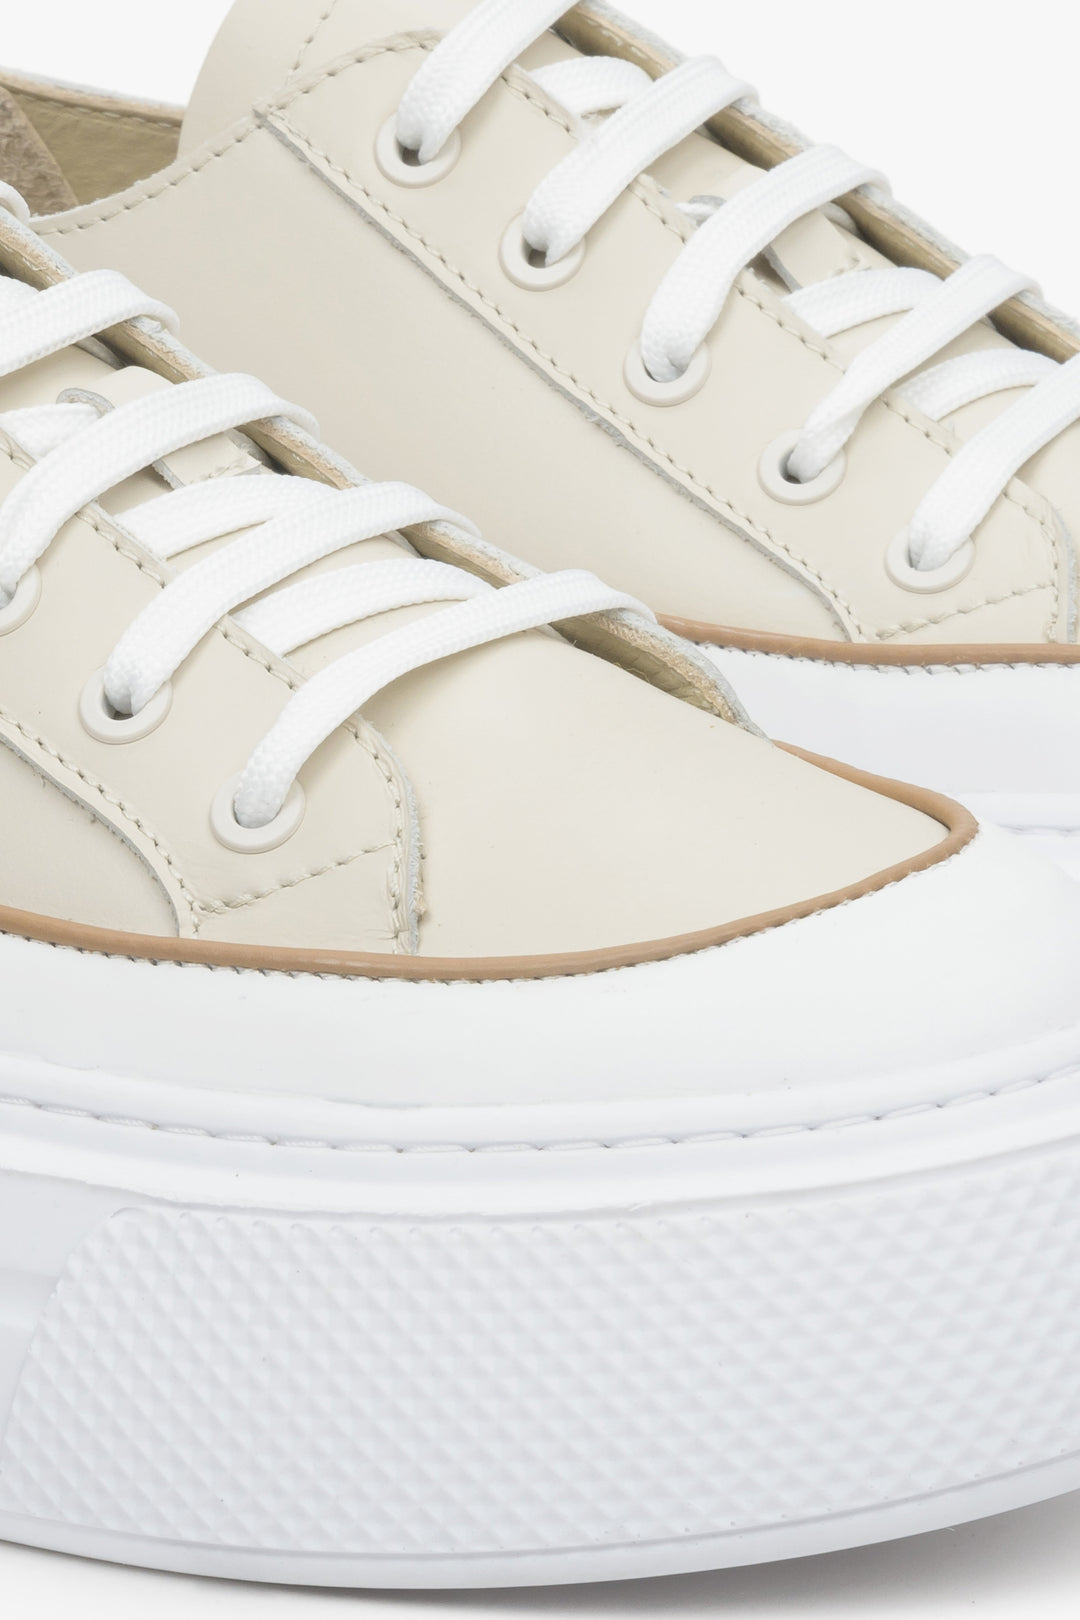 Women's light beige and white leather sneakers - a close up on details.